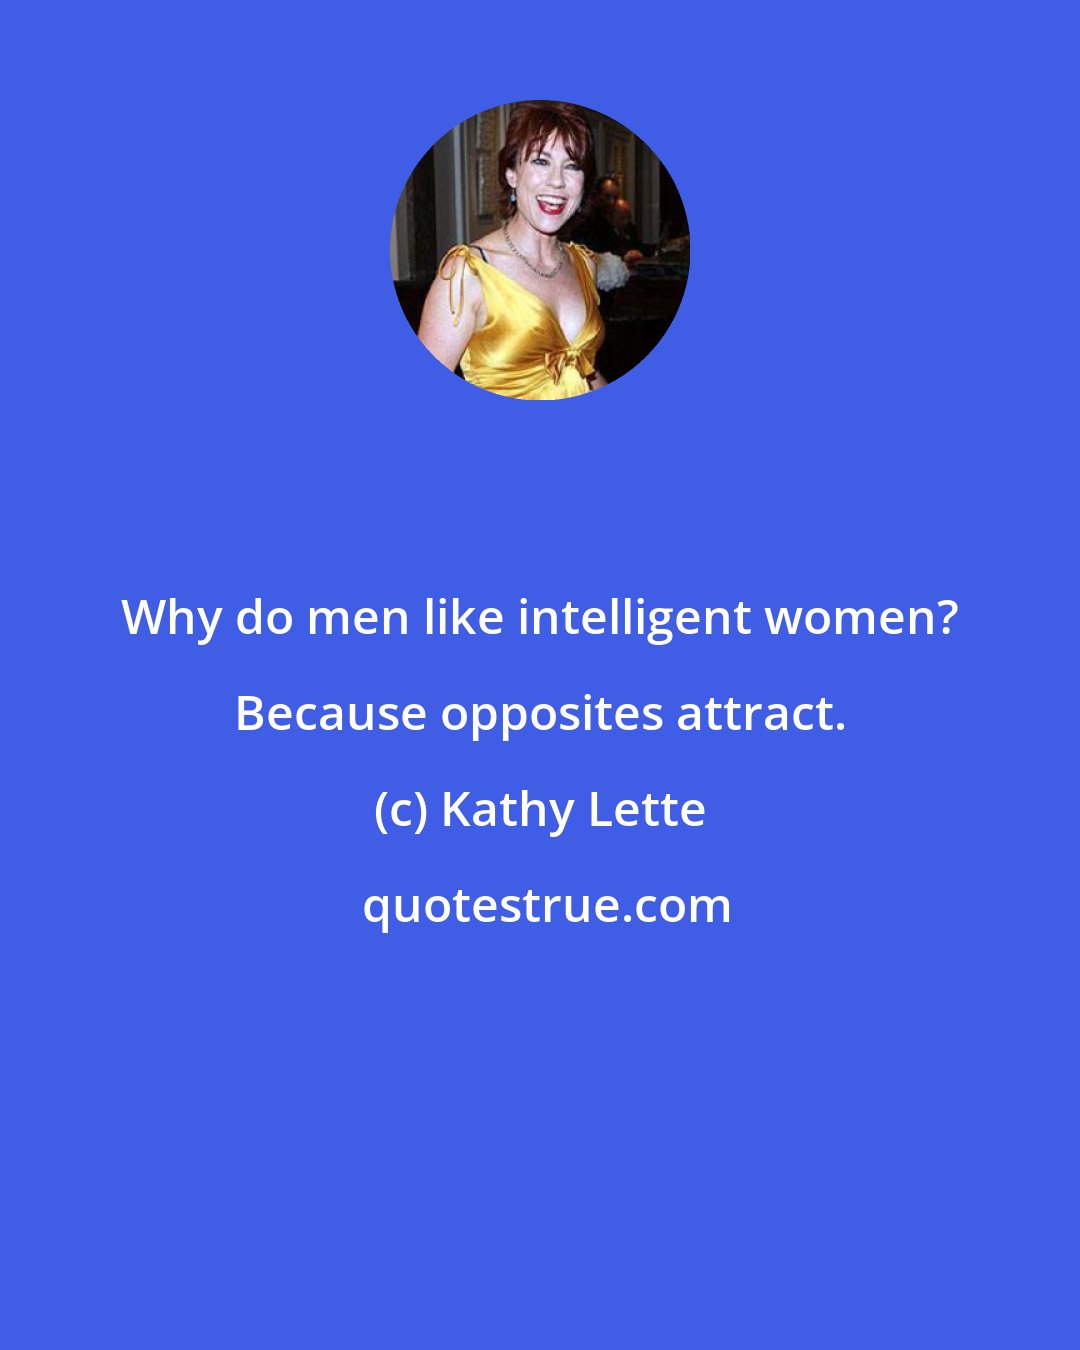 Kathy Lette: Why do men like intelligent women? Because opposites attract.